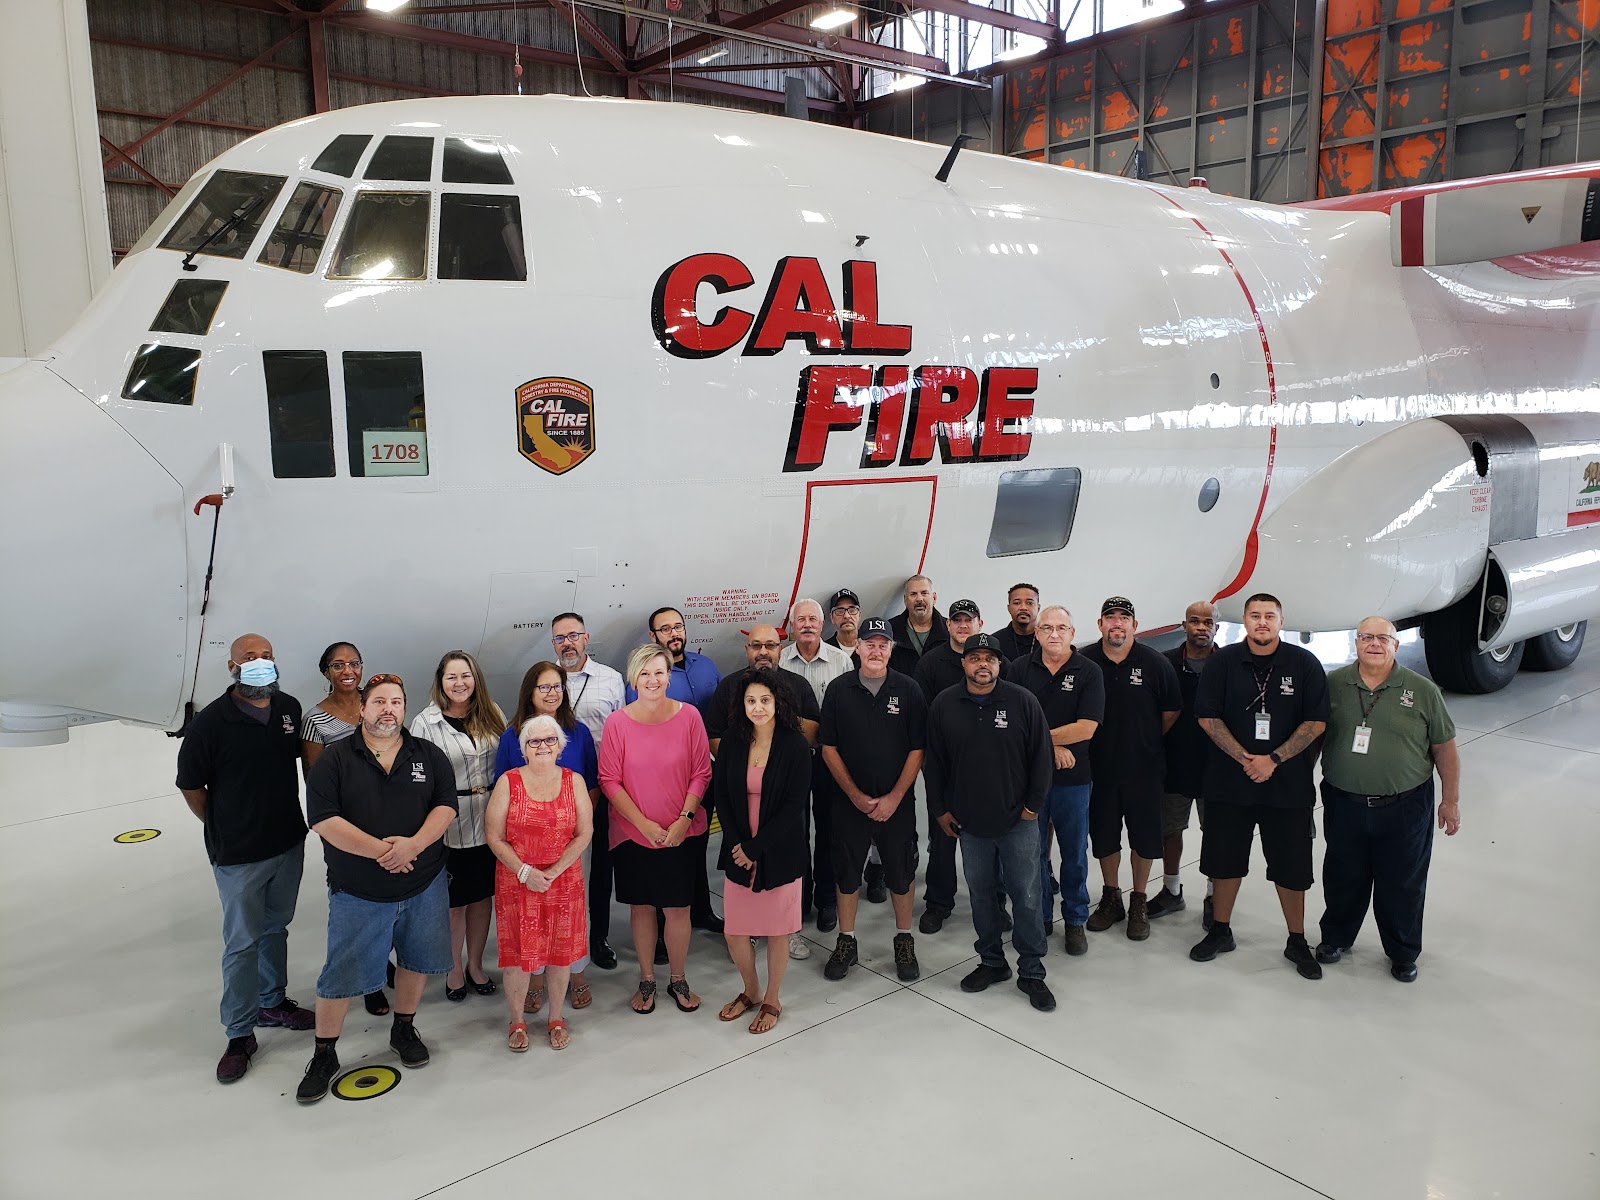 LSI employees assemble beside a former Coast Guard C-130aircraft. It is one of seven to be converted to an operational Airtanker capable of delivering up to 4,000 gallons of fire retardant.Row 1: Lance Larscheid, Warehouse;  Shirley Milke, Procurement;  Kathy Medina, Procurement; Desiree Smith, Procurement;  Mike Paulsen, Warehouse Lead;  Drew Owens, Helicopter Parts Room. Row 2: Adonis Williams, Helicopter Parts Room Lead;  Dawn Sealy, Aviation Logistician;  Lori Young, Aviation Logistician Lead;  Pat Hoffman, Procurement;  Rob O’Donnell, Procurement;  Stephen Horvath, Procurement Lead;  Tony Almora, Tool Room;  John Flovin, HazMat & Industrial Safety Coordinator;  George Hernandez, Warehouse;  Greg Smith, Senior Inventory Supervisor;  Robbie Turner, Warehouse;  Dameion Thomas, Fixed Wing Parts Room;  Mark Vossler, Senior Inventory Supervisor;  Dan Tollett, HazMat & Facility Maintenance;  Marc Stone, Tool Room;  Anthony Benavidez, Fixed Wing Parts Room;  John Firebaugh, Aviation Logistics Support Manager. Not in picture: Jason Farley, Fixed Wing Parts Room Lead;  Bill Busig, Fixed Wing Parts Room;  Tanner Slates, Fixed Wing Parts Room & Quantum Specialist (currently);  James Van Hook, Accounting